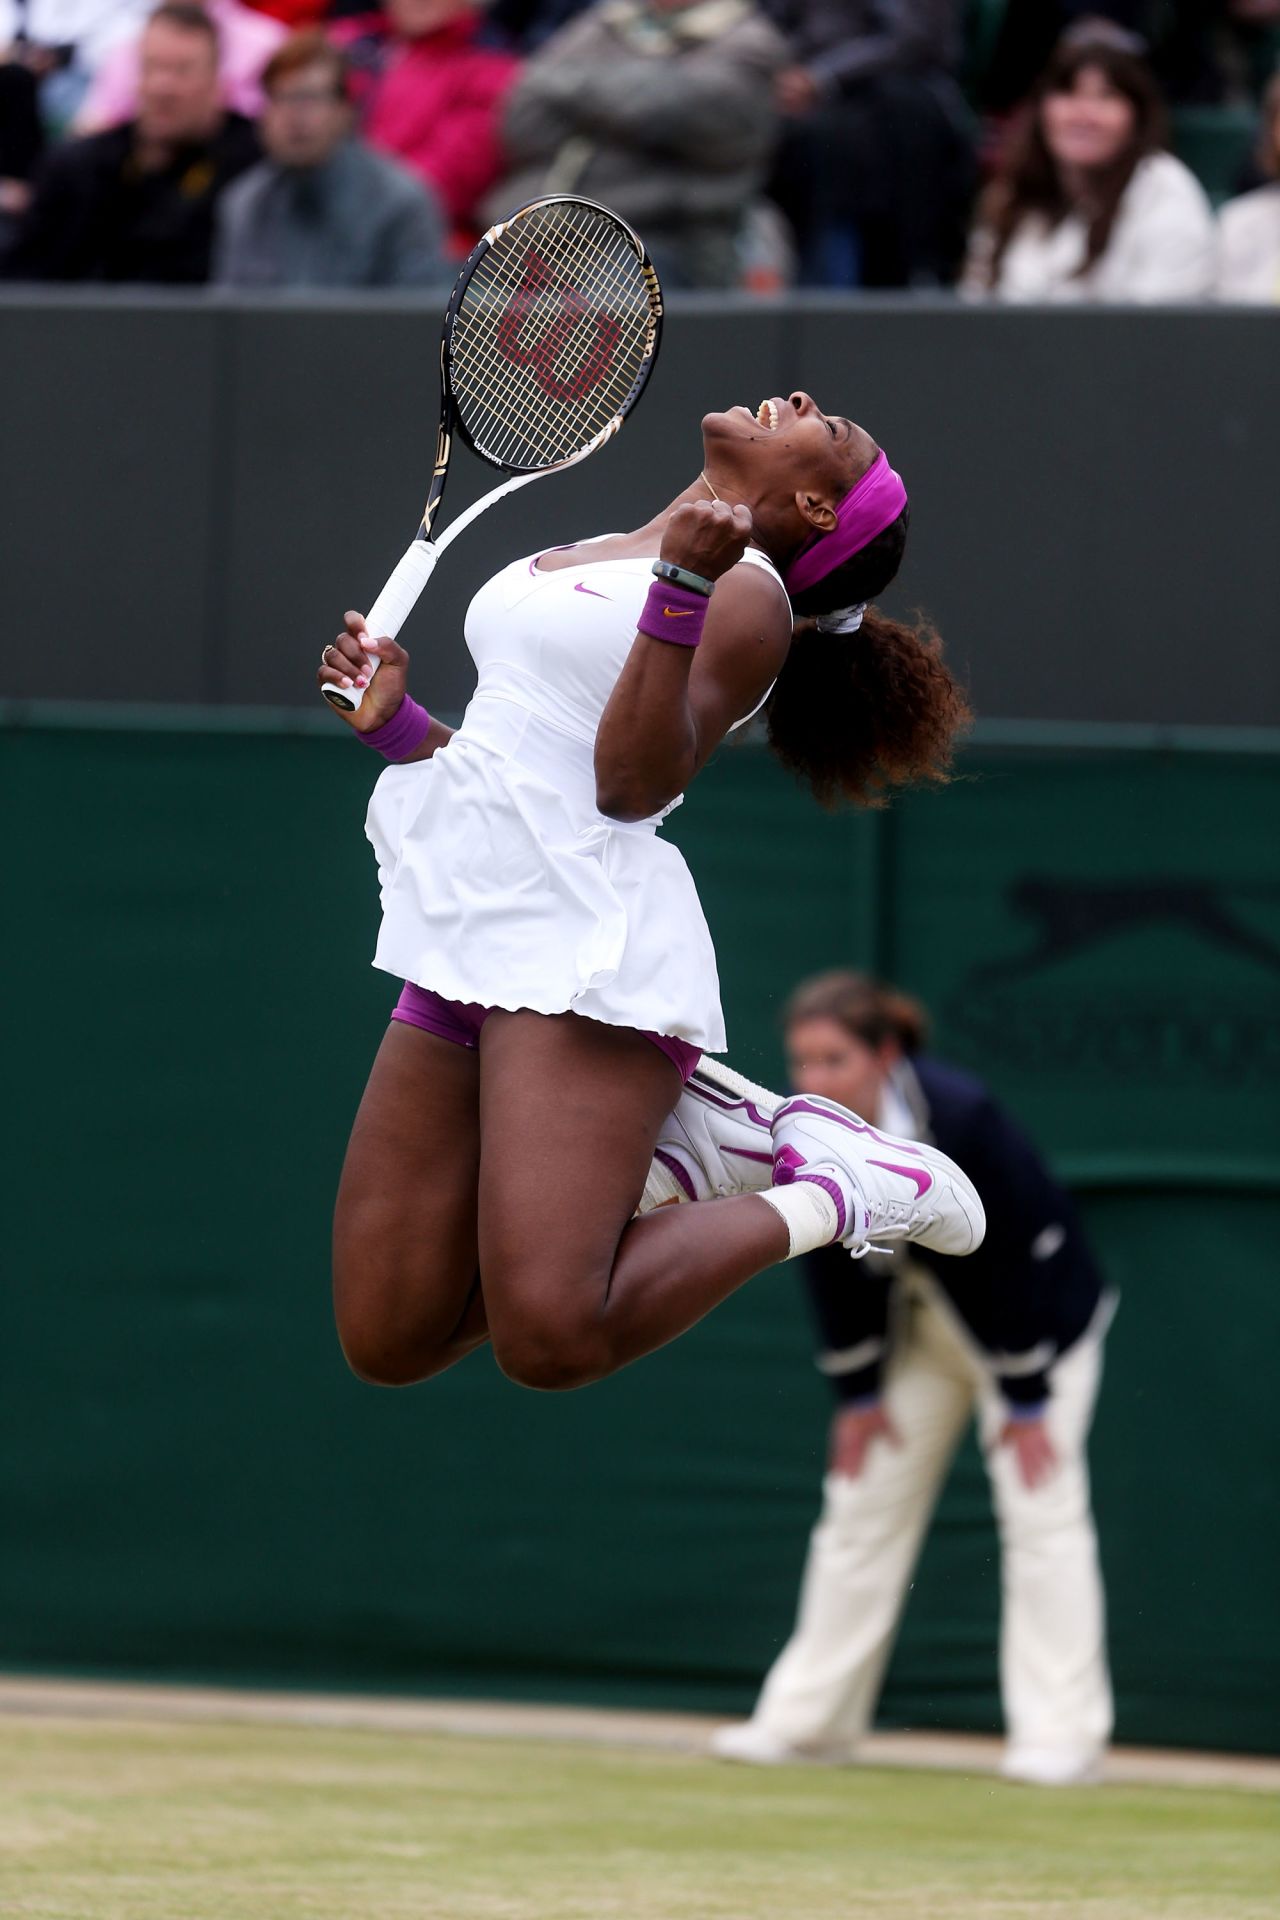 Serena Williams is also through to the last eight as she seeks her first grand slam title since winning Wimbledon for the fourth time in 2010.